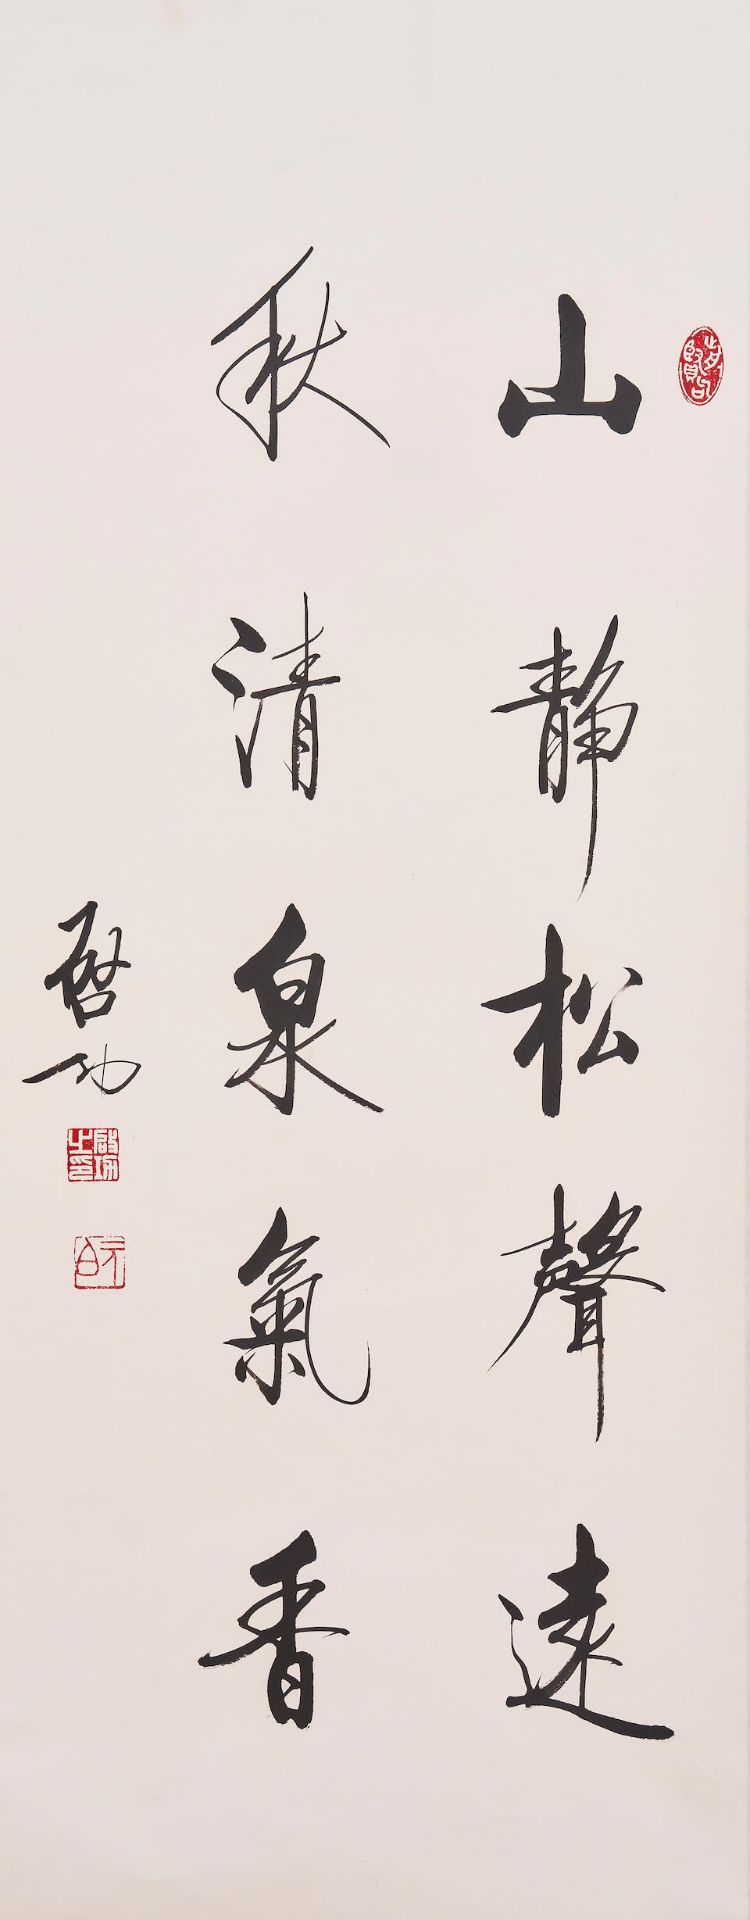 Attributed to Qi Gong (1912-2005) Calligraphy in Running Style